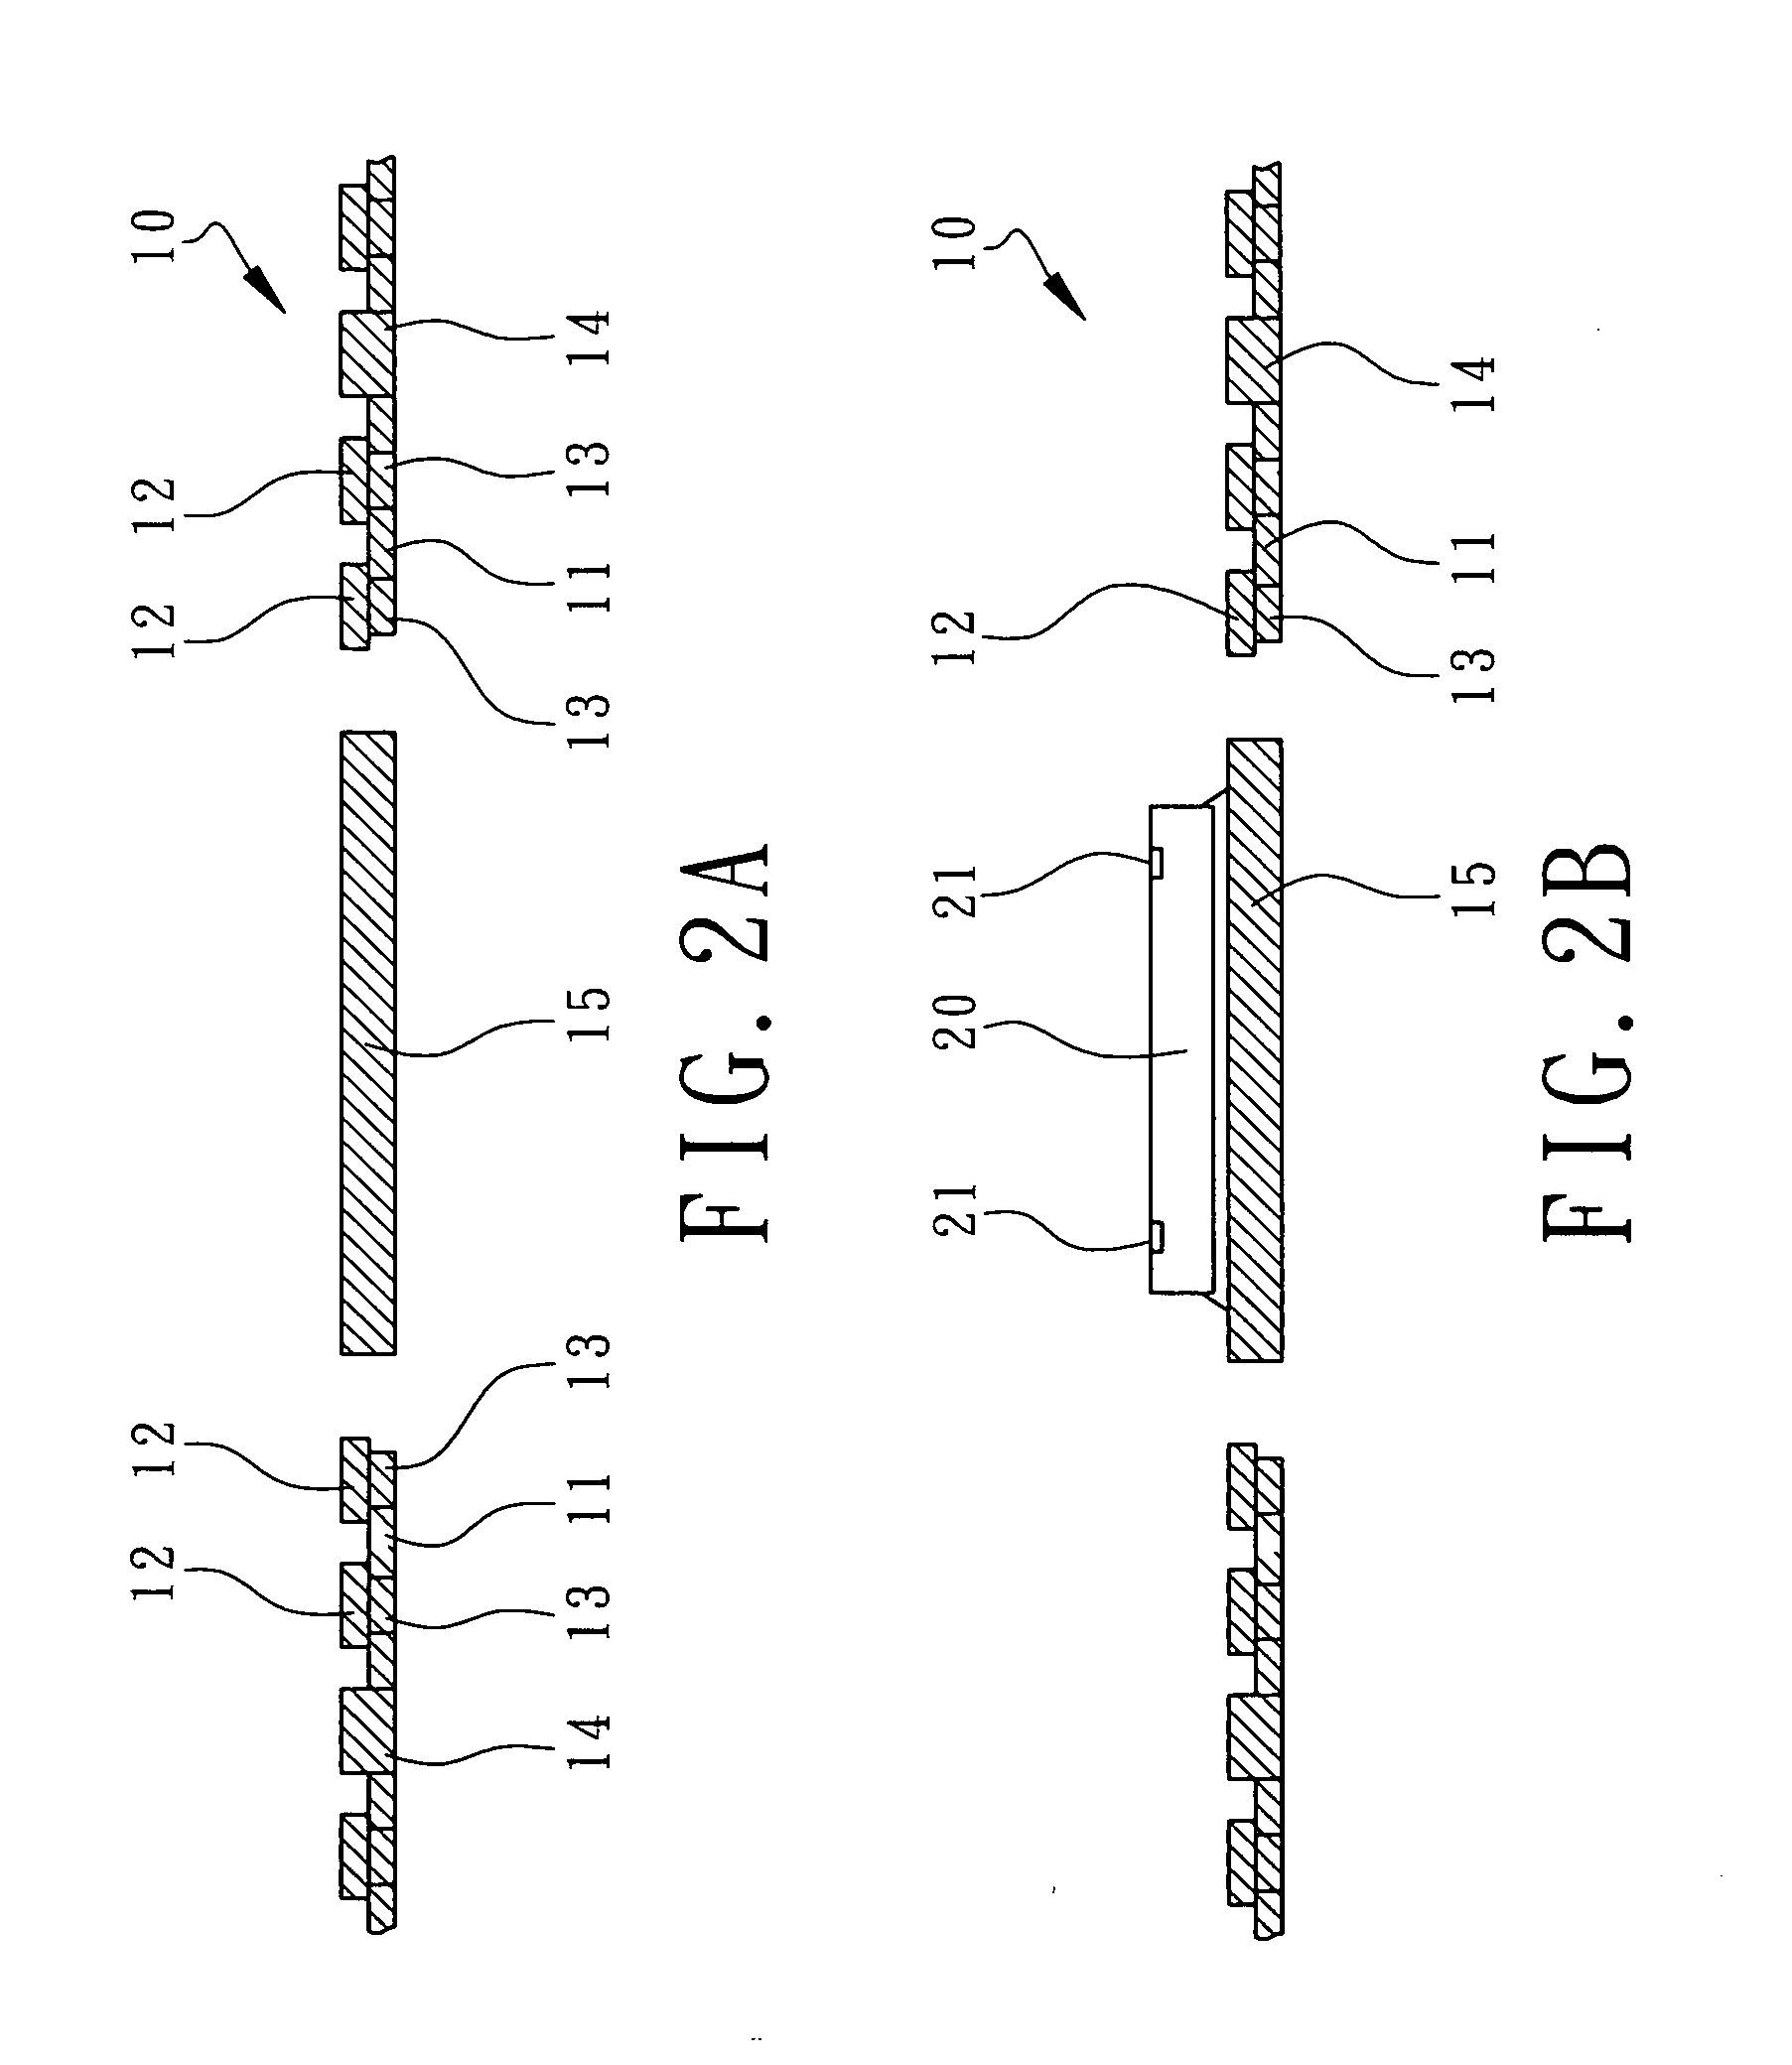 Fabrication processes of leadframe-based BGA packages and leadless leadframe implemented in the processes